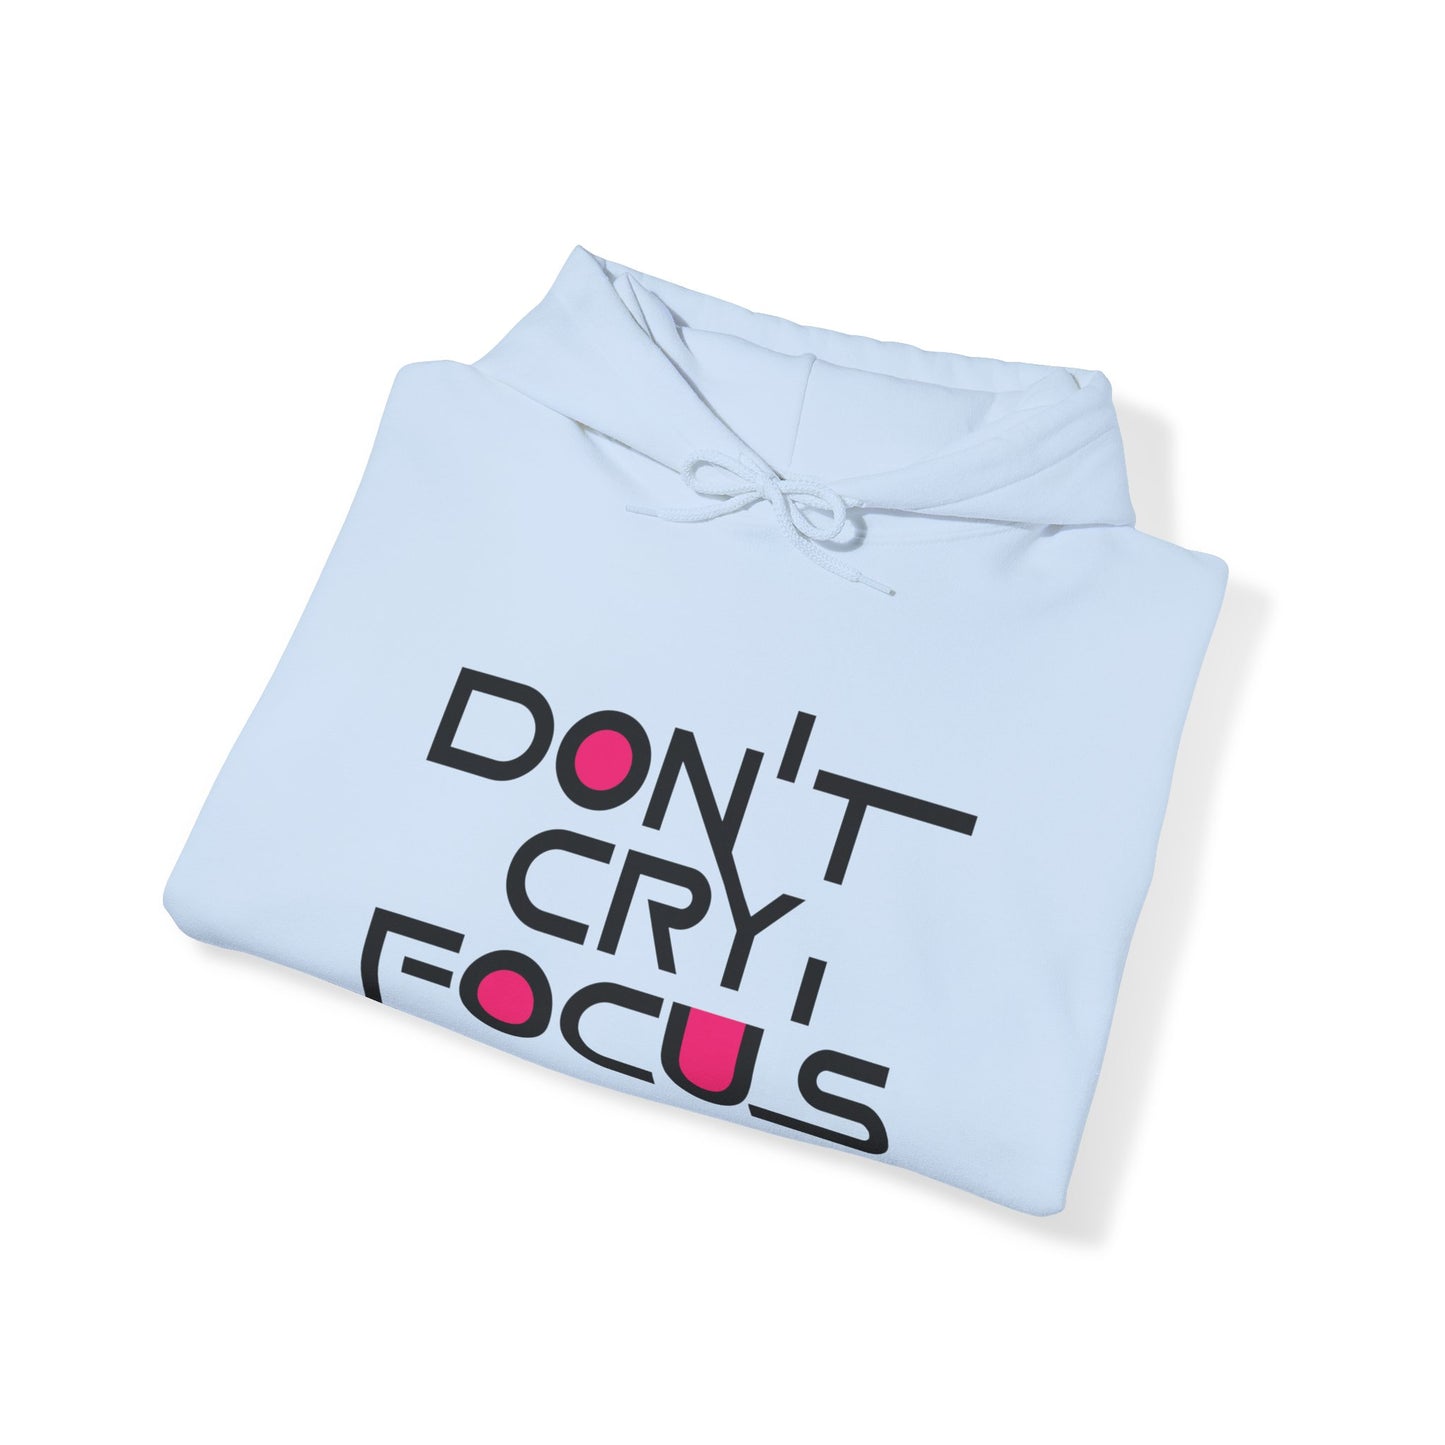 Don't Cry, Focus | SYCU | Hoodie